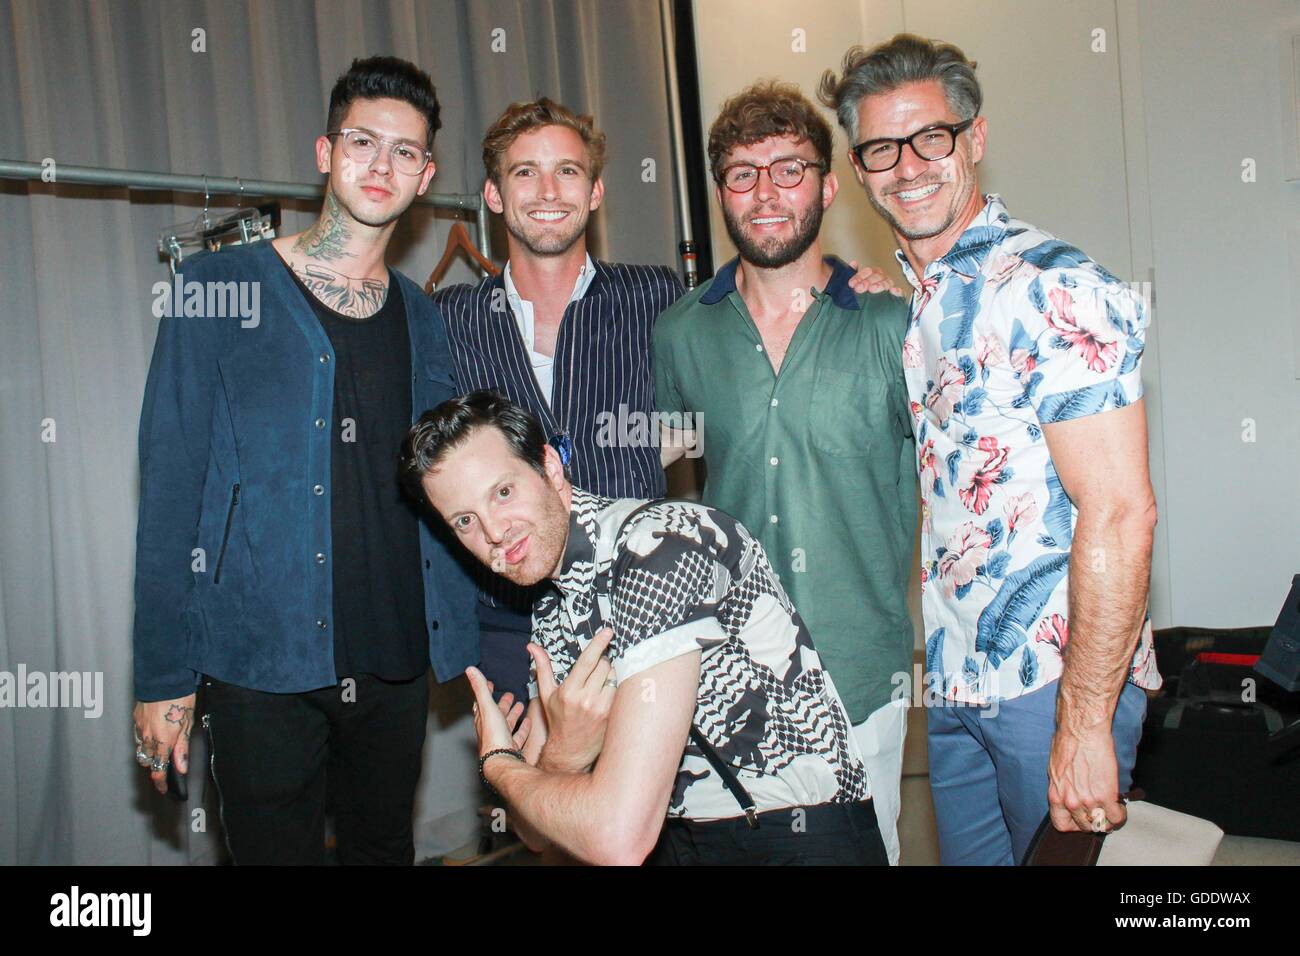 New York, NY, USA. 14th July, 2016. Travis Mills, RJ King, Timo Weiland, Eric Rutherford, Mayer Hawthorne in attendance for Timo Weiland Men's Runway Show - Spring/Summer 2017, Cadillac House, New York, NY July 14, 2016. © Achim Harding/Everett Collection/Alamy Live News Stock Photo